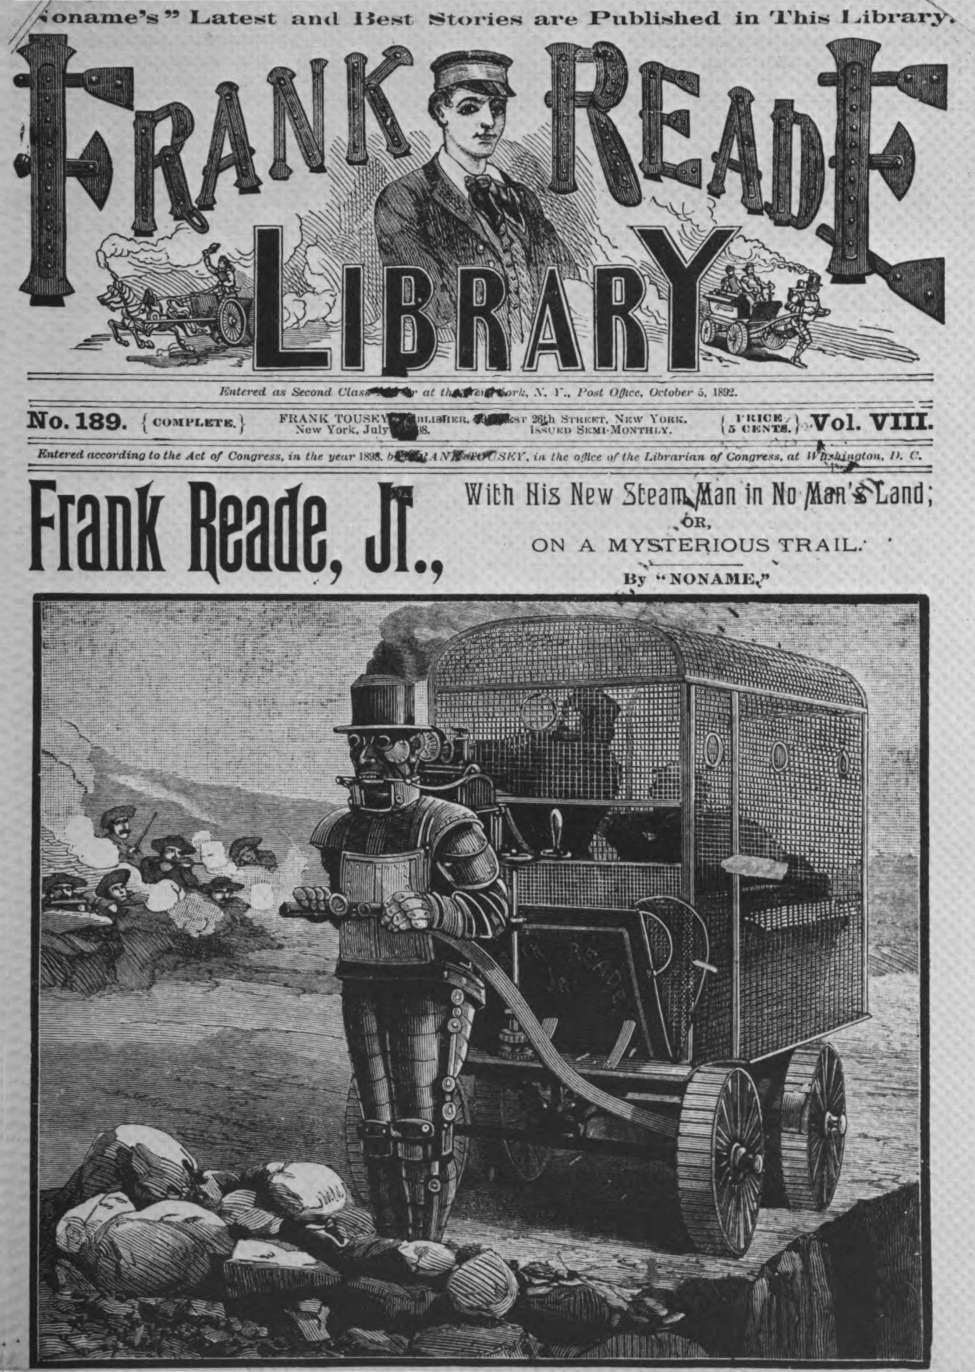 Book Cover For v01 2(189) - Frank Reade with His New Steam Man in No Man's Land